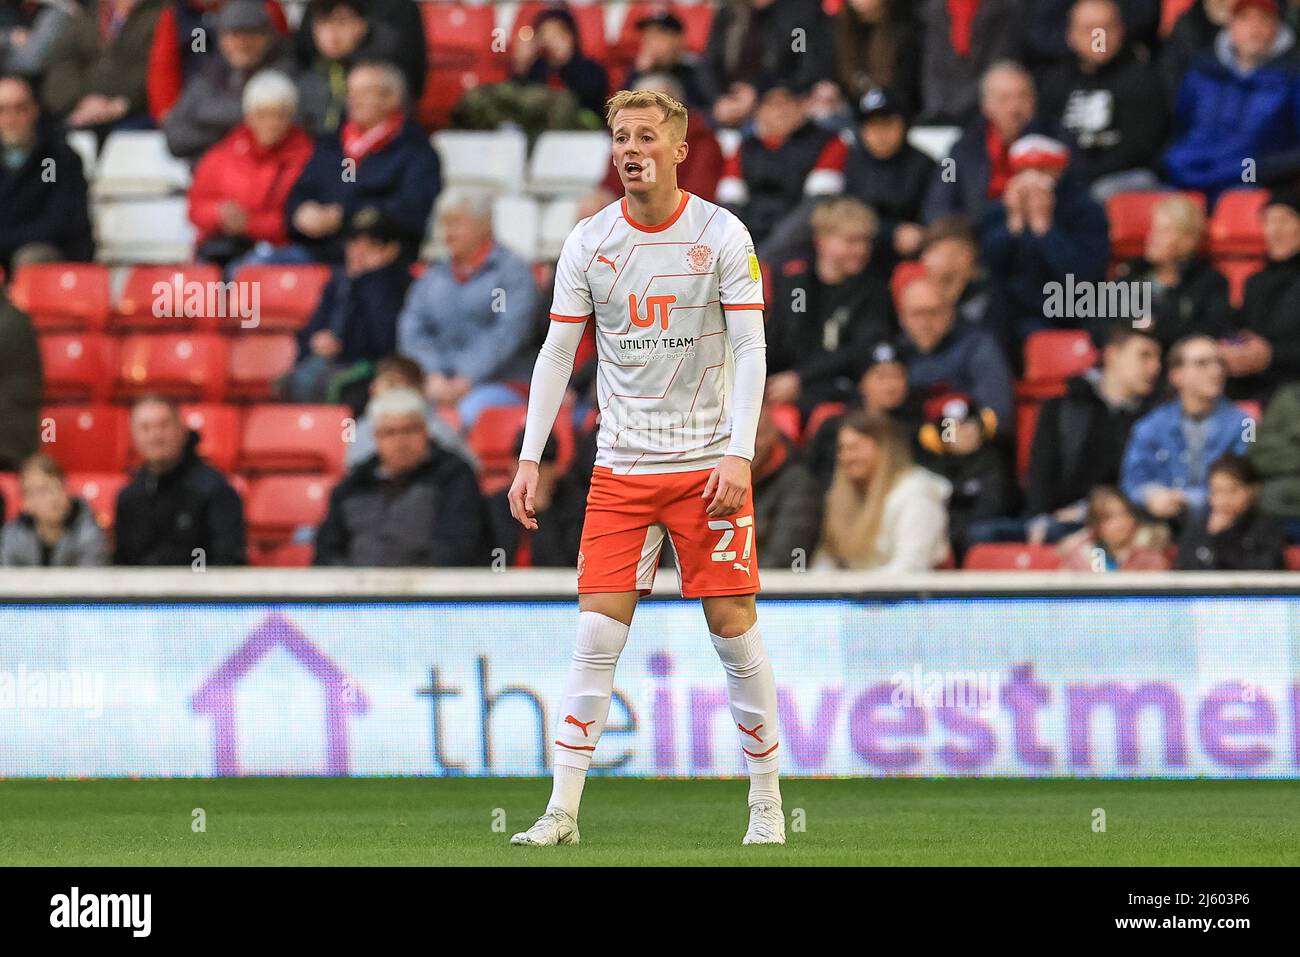 Charlie Kirk #27 of Blackpool during the game Stock Photo